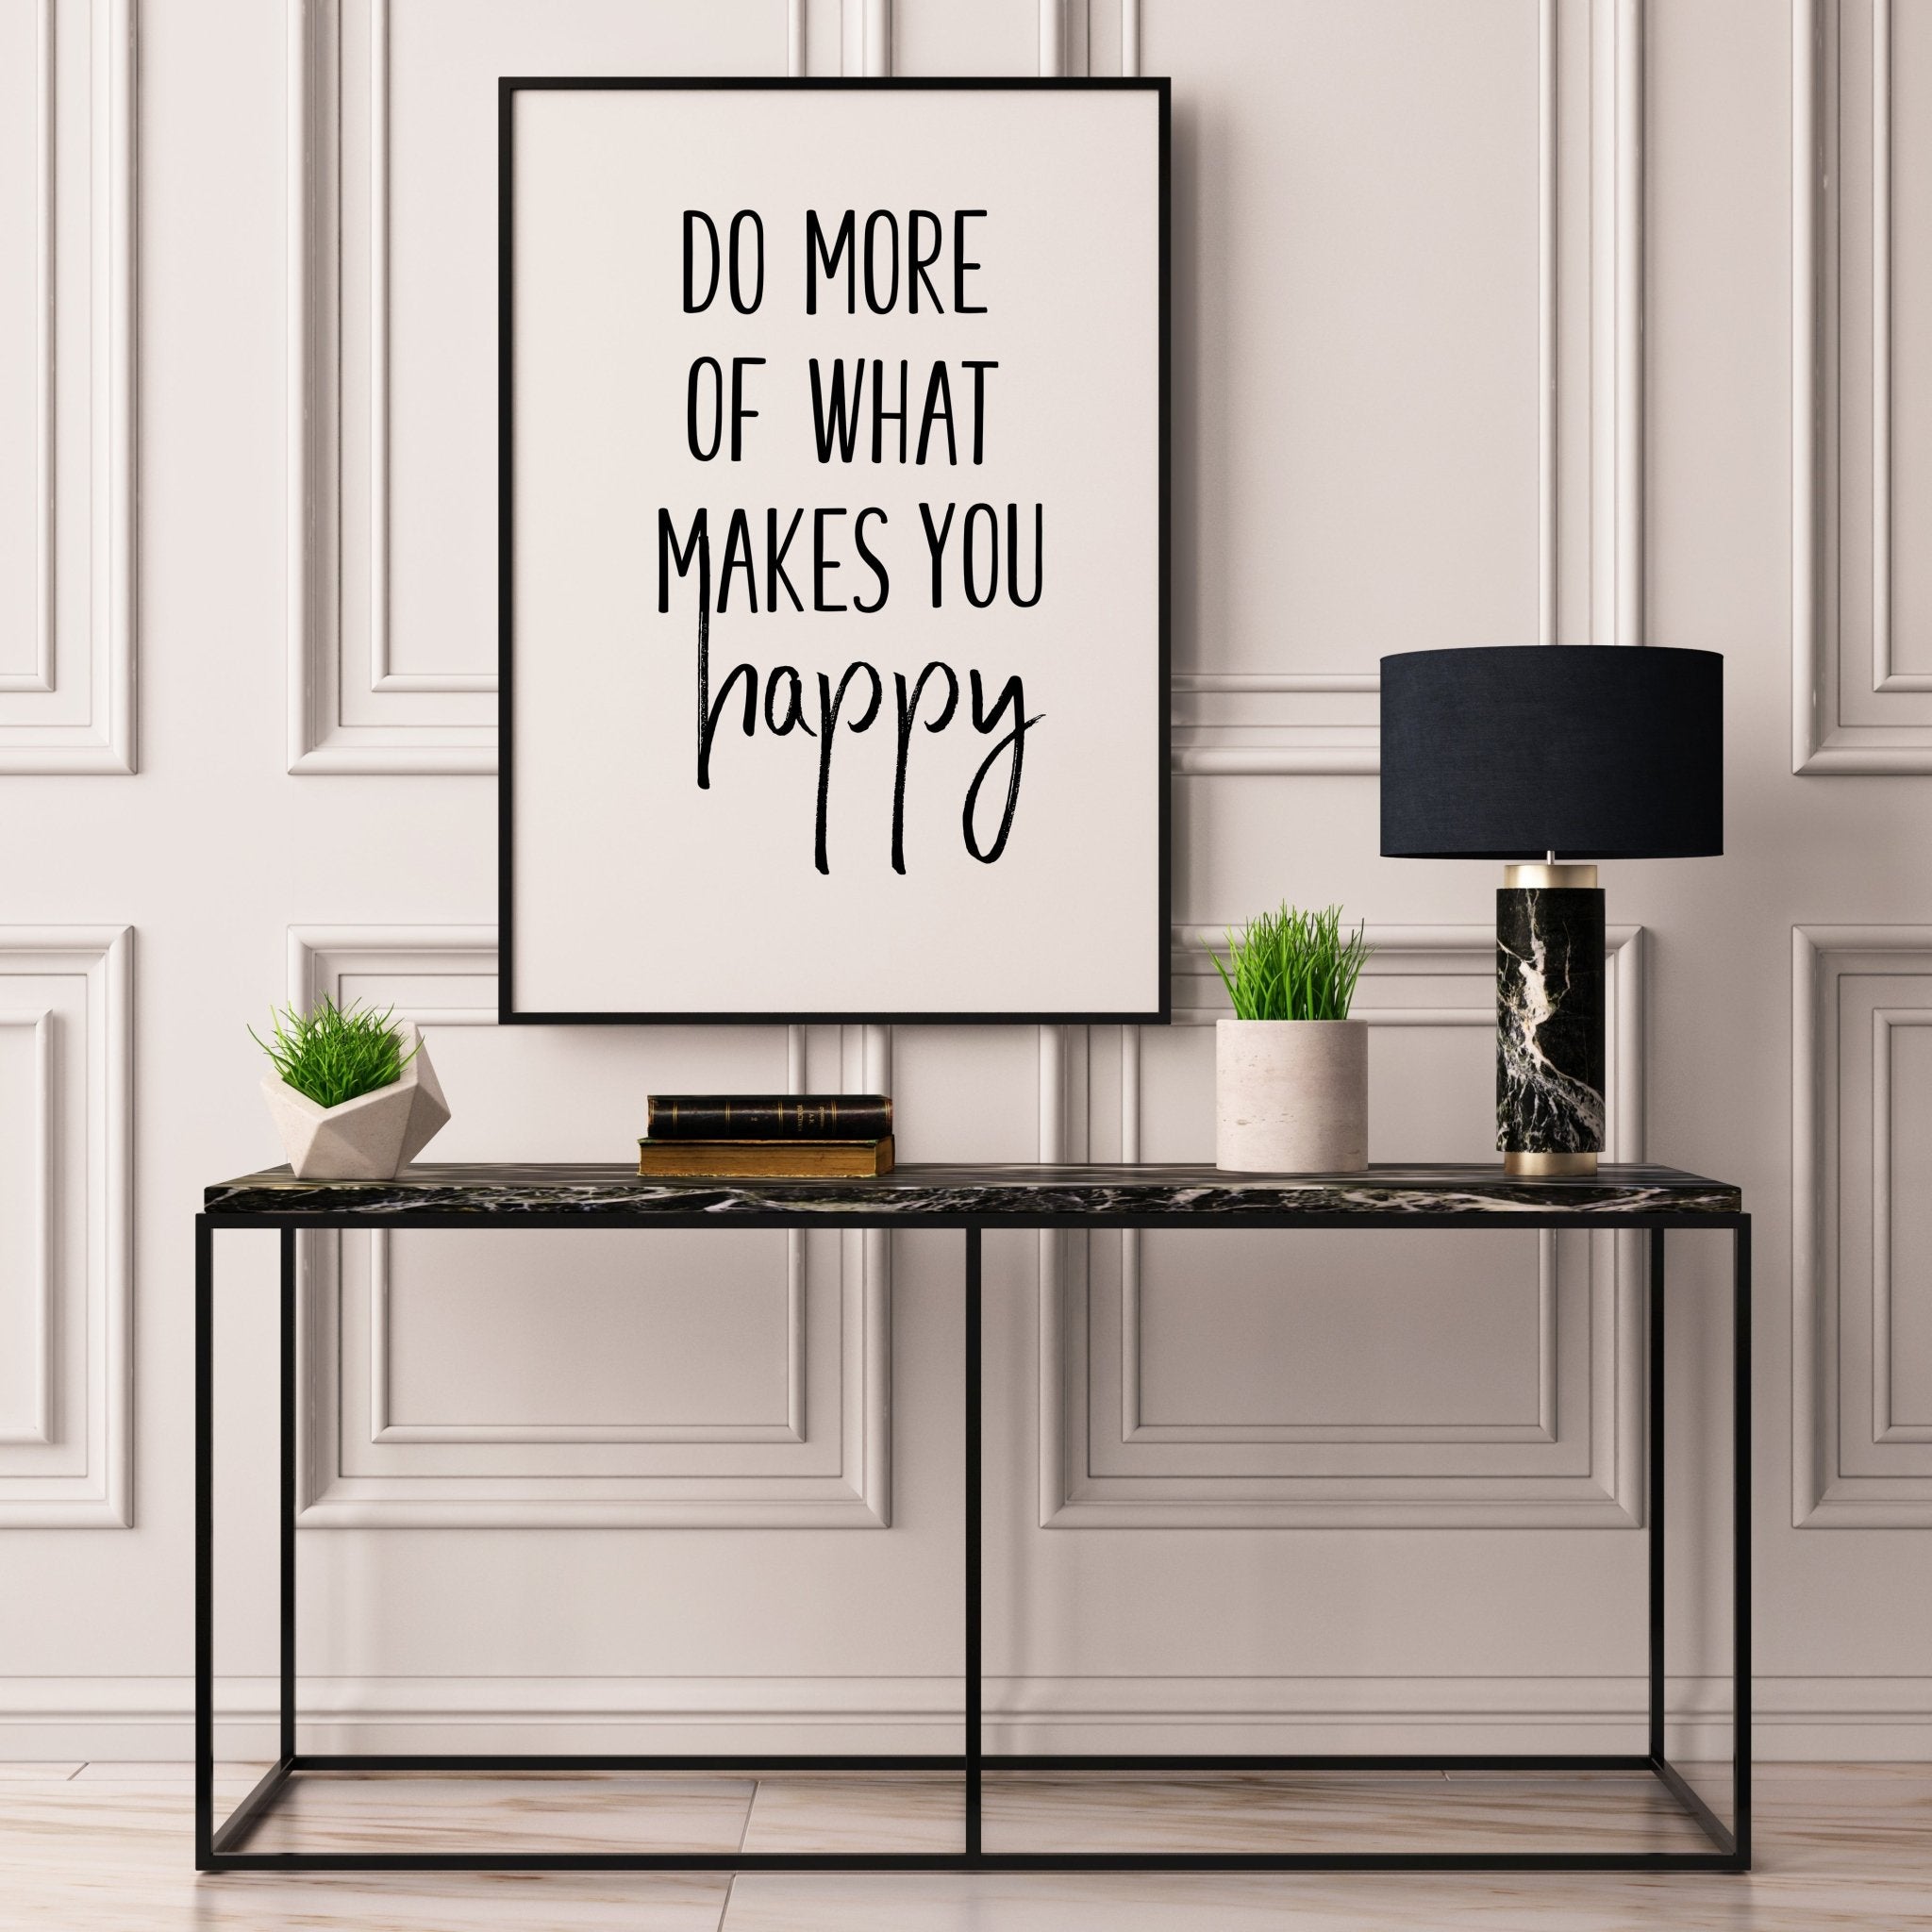 Do More Of What Makes You Happy - D'Luxe Prints